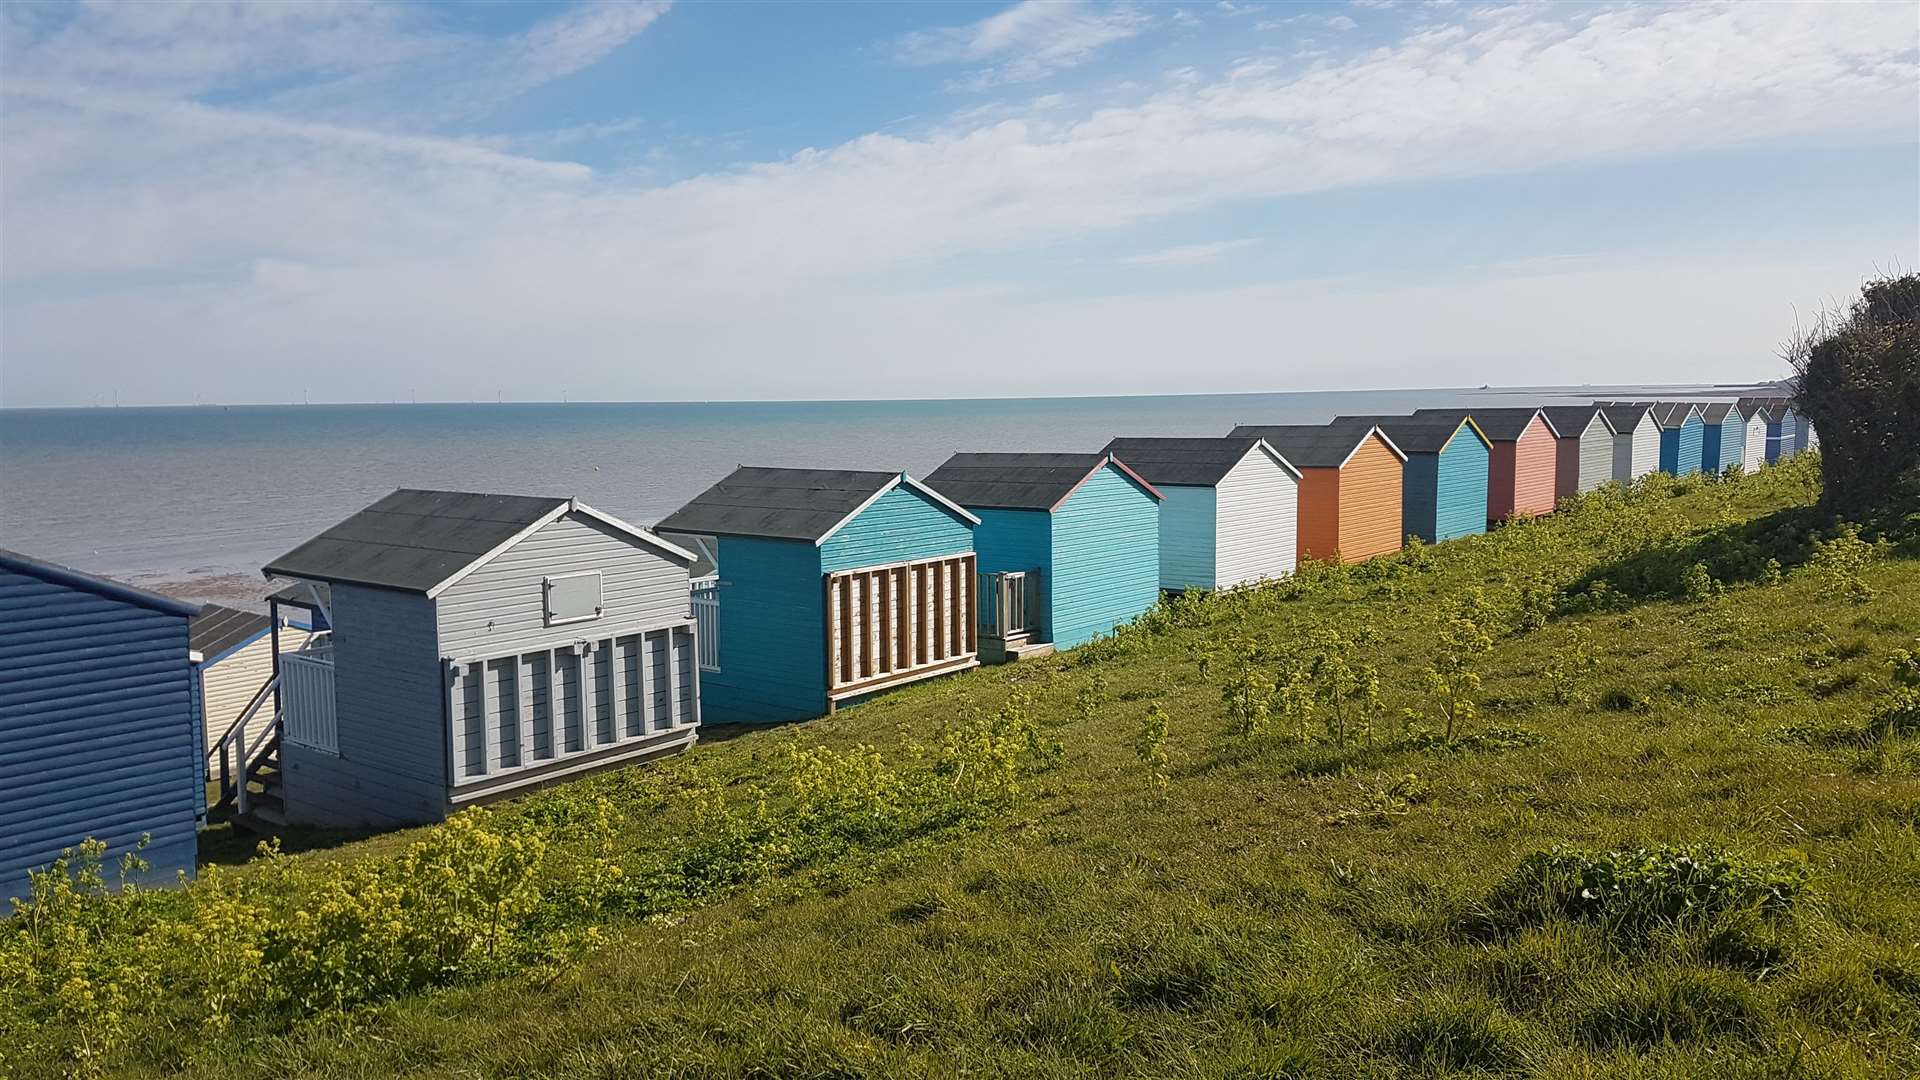 Beach huts in Tankerton, Whitstable